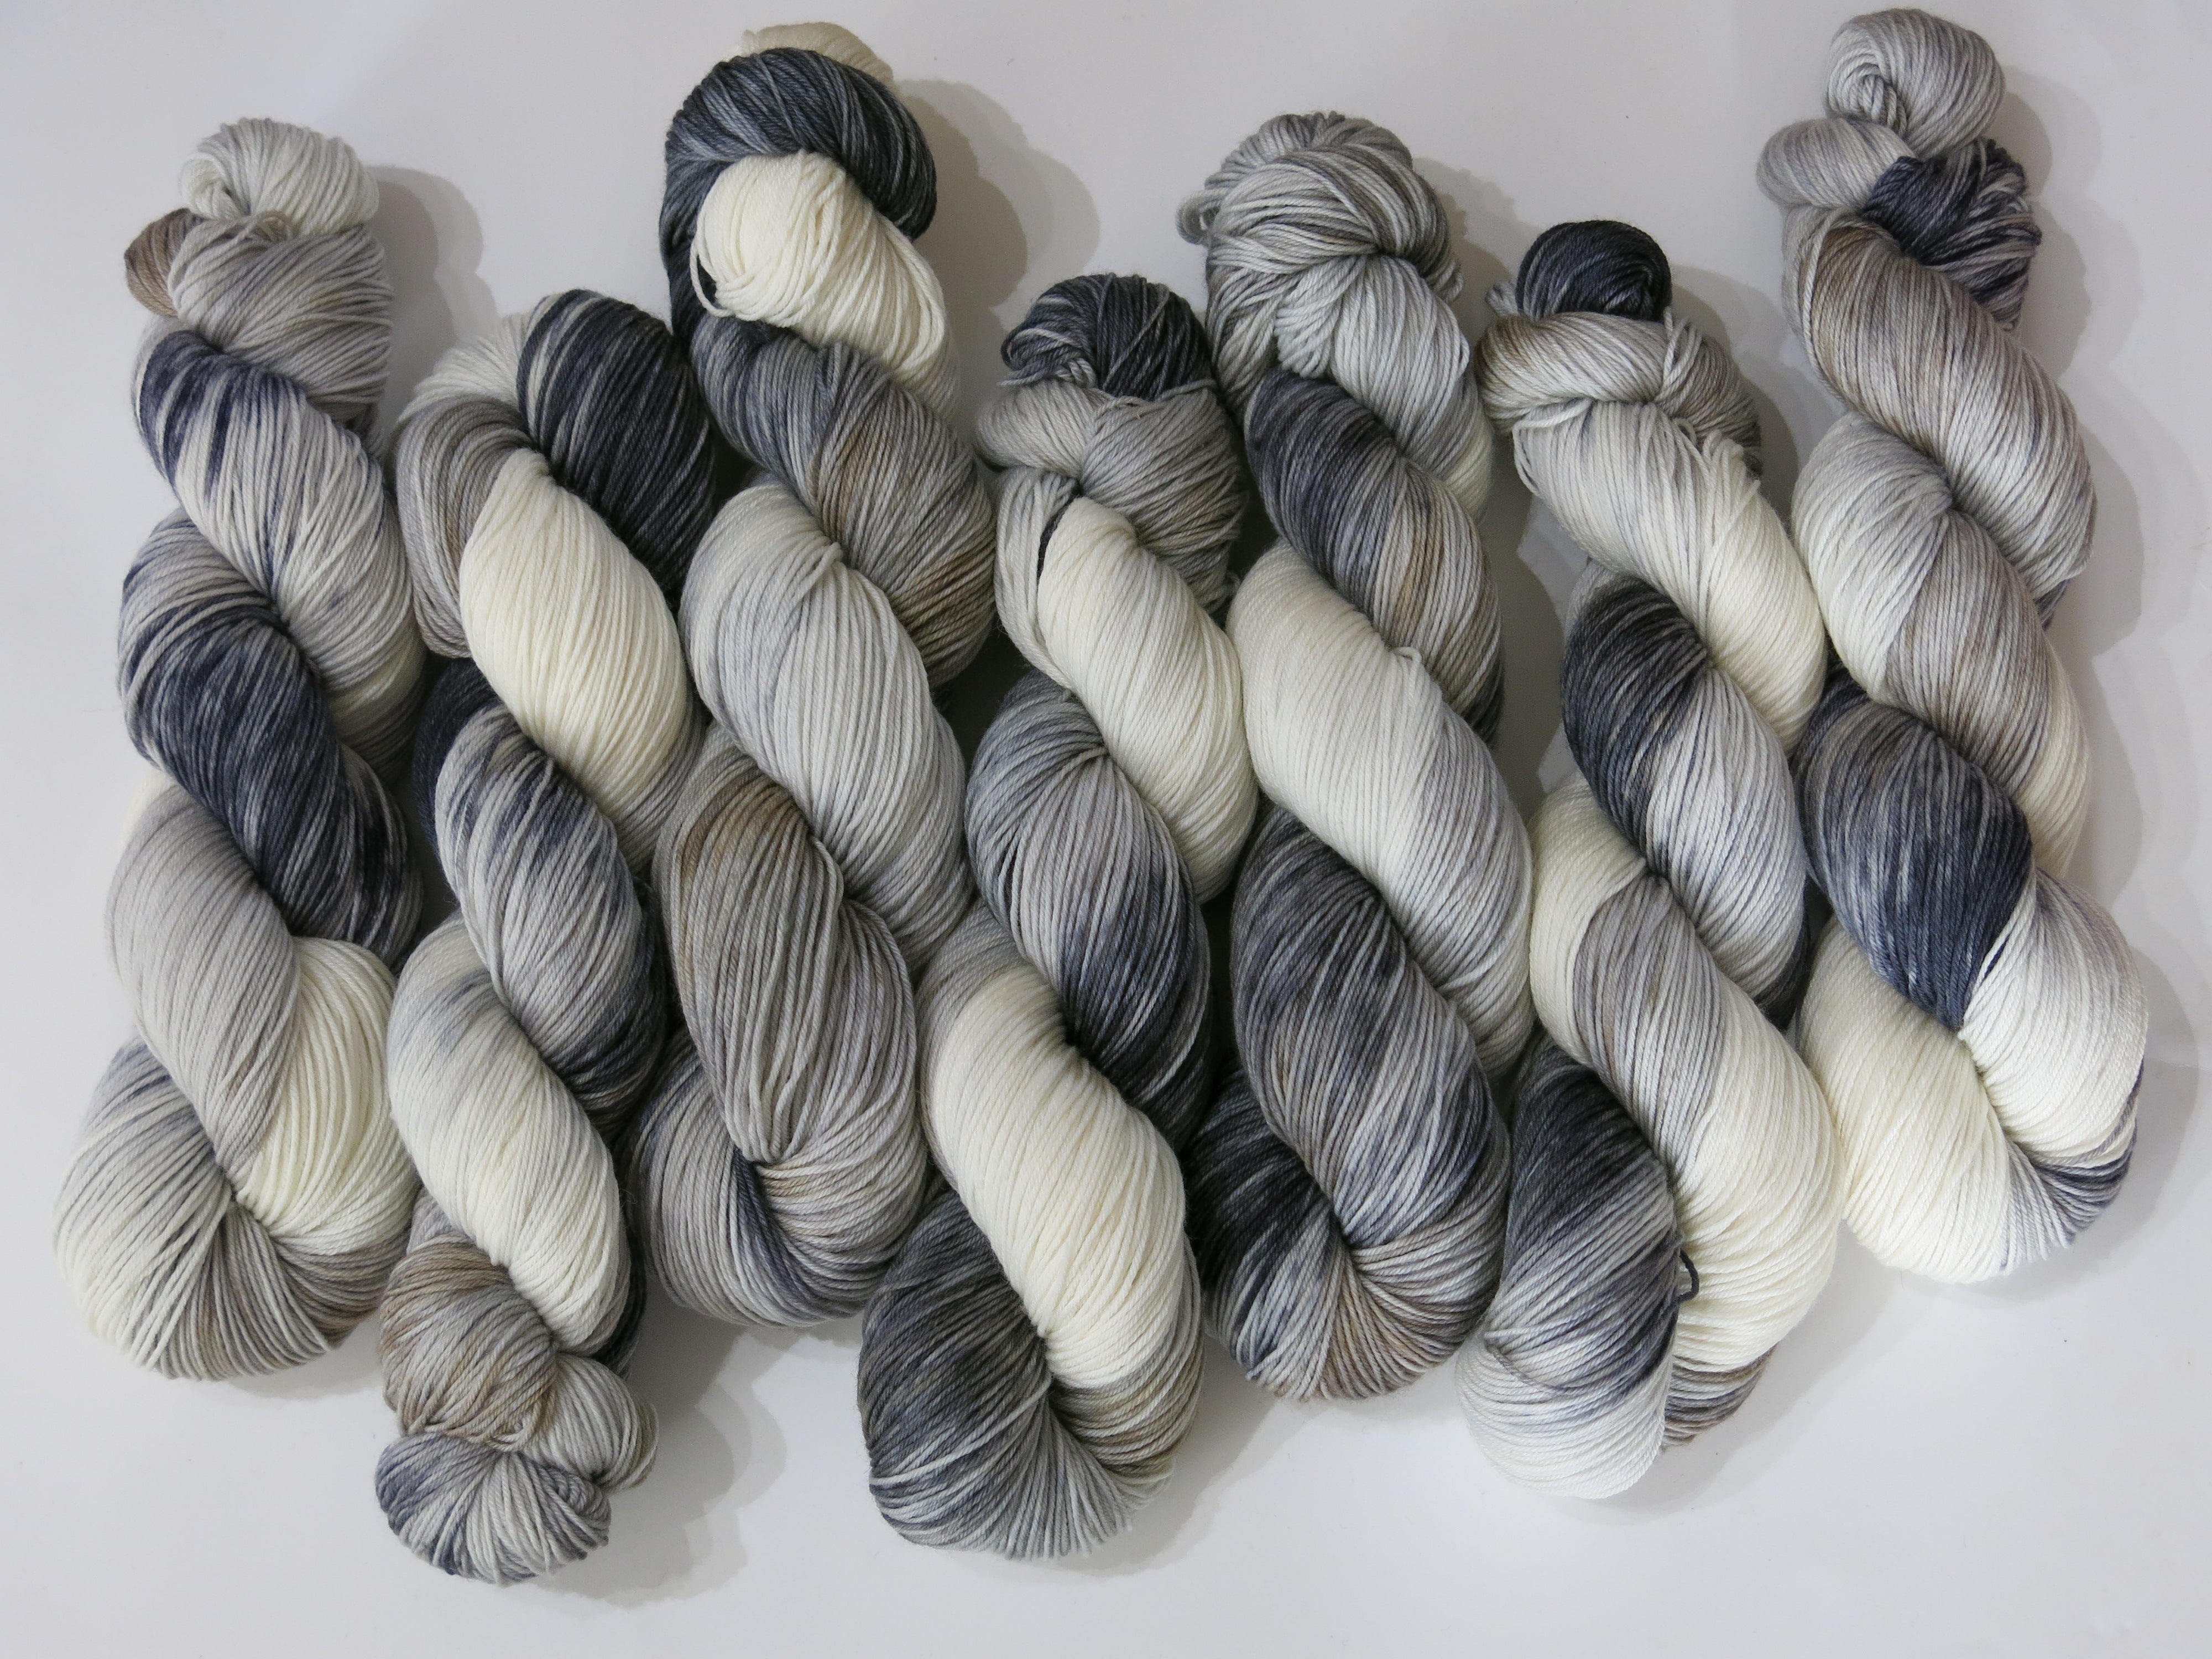 light and dark grey and white horse themed sock yarn for knitting and crochet